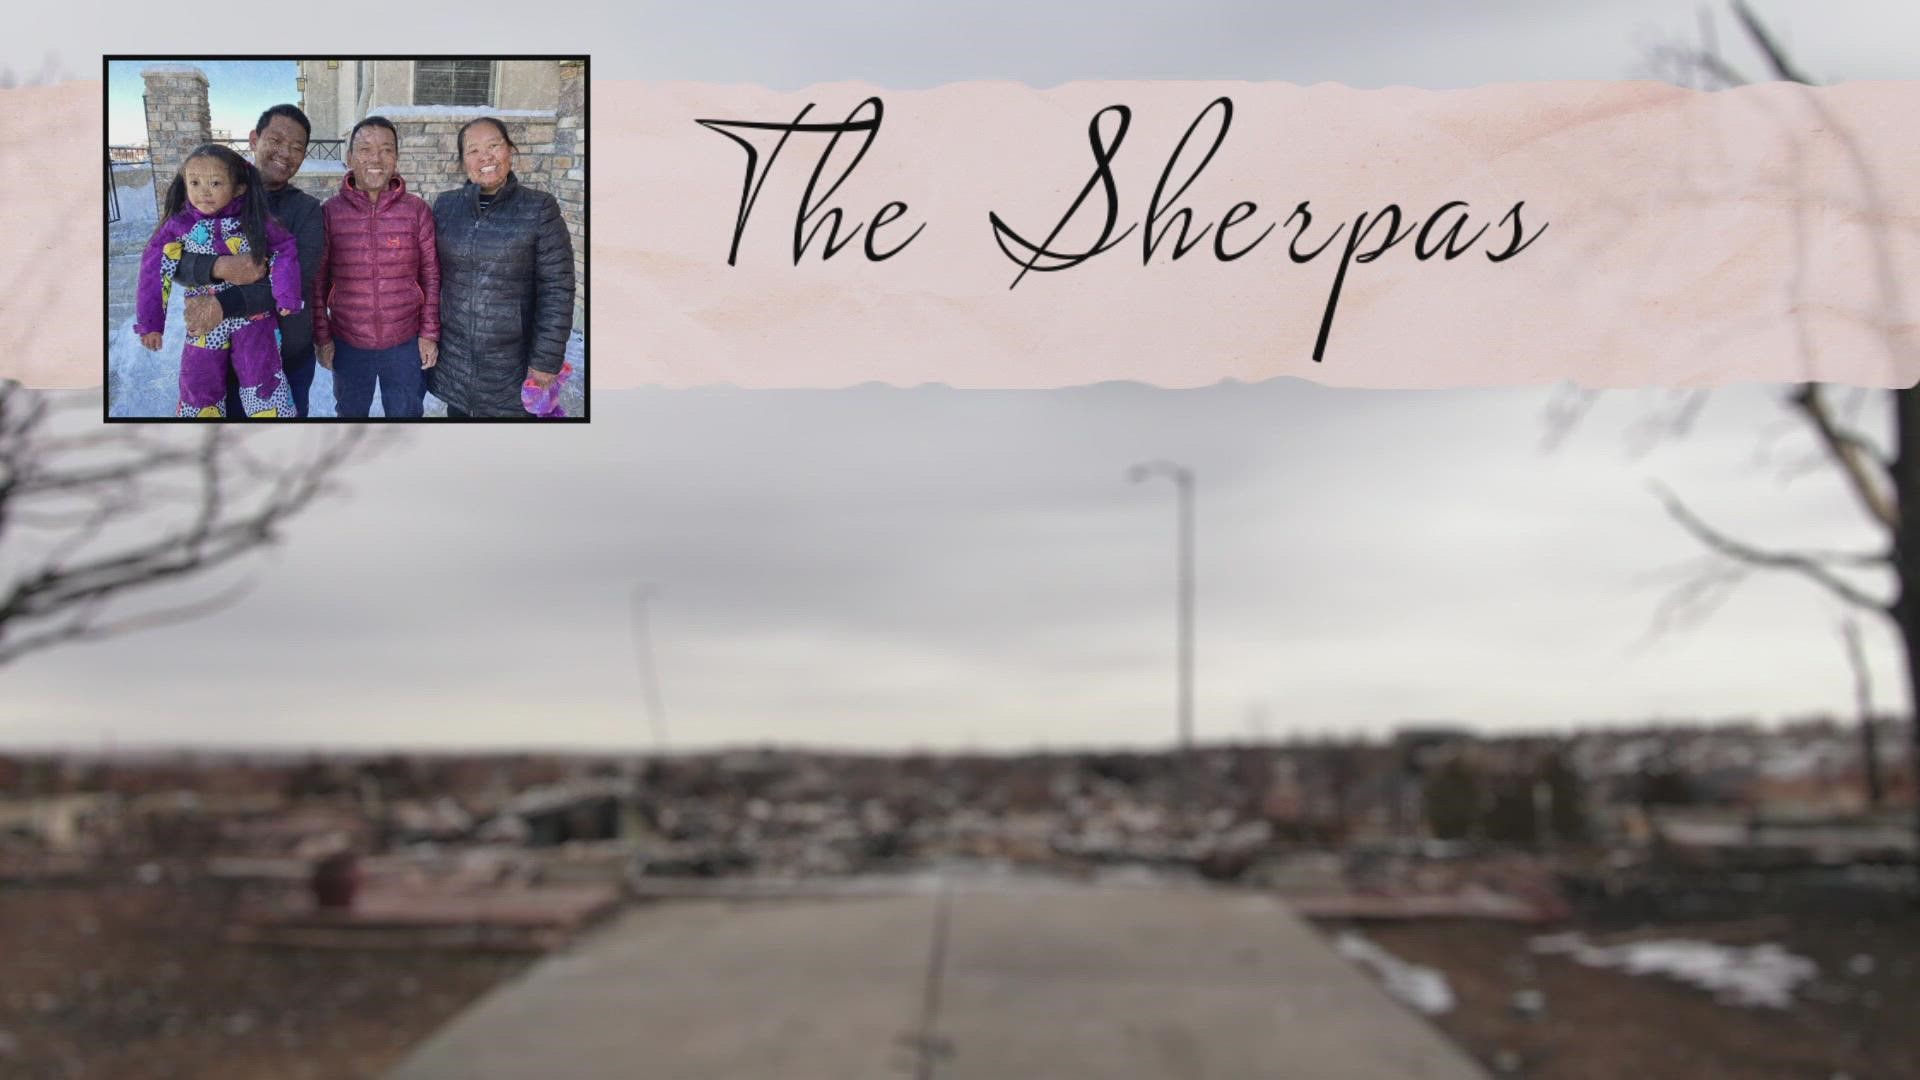 The Sherpa family talks about their experience rebuilding their home after losing it in the Marshall Fire.